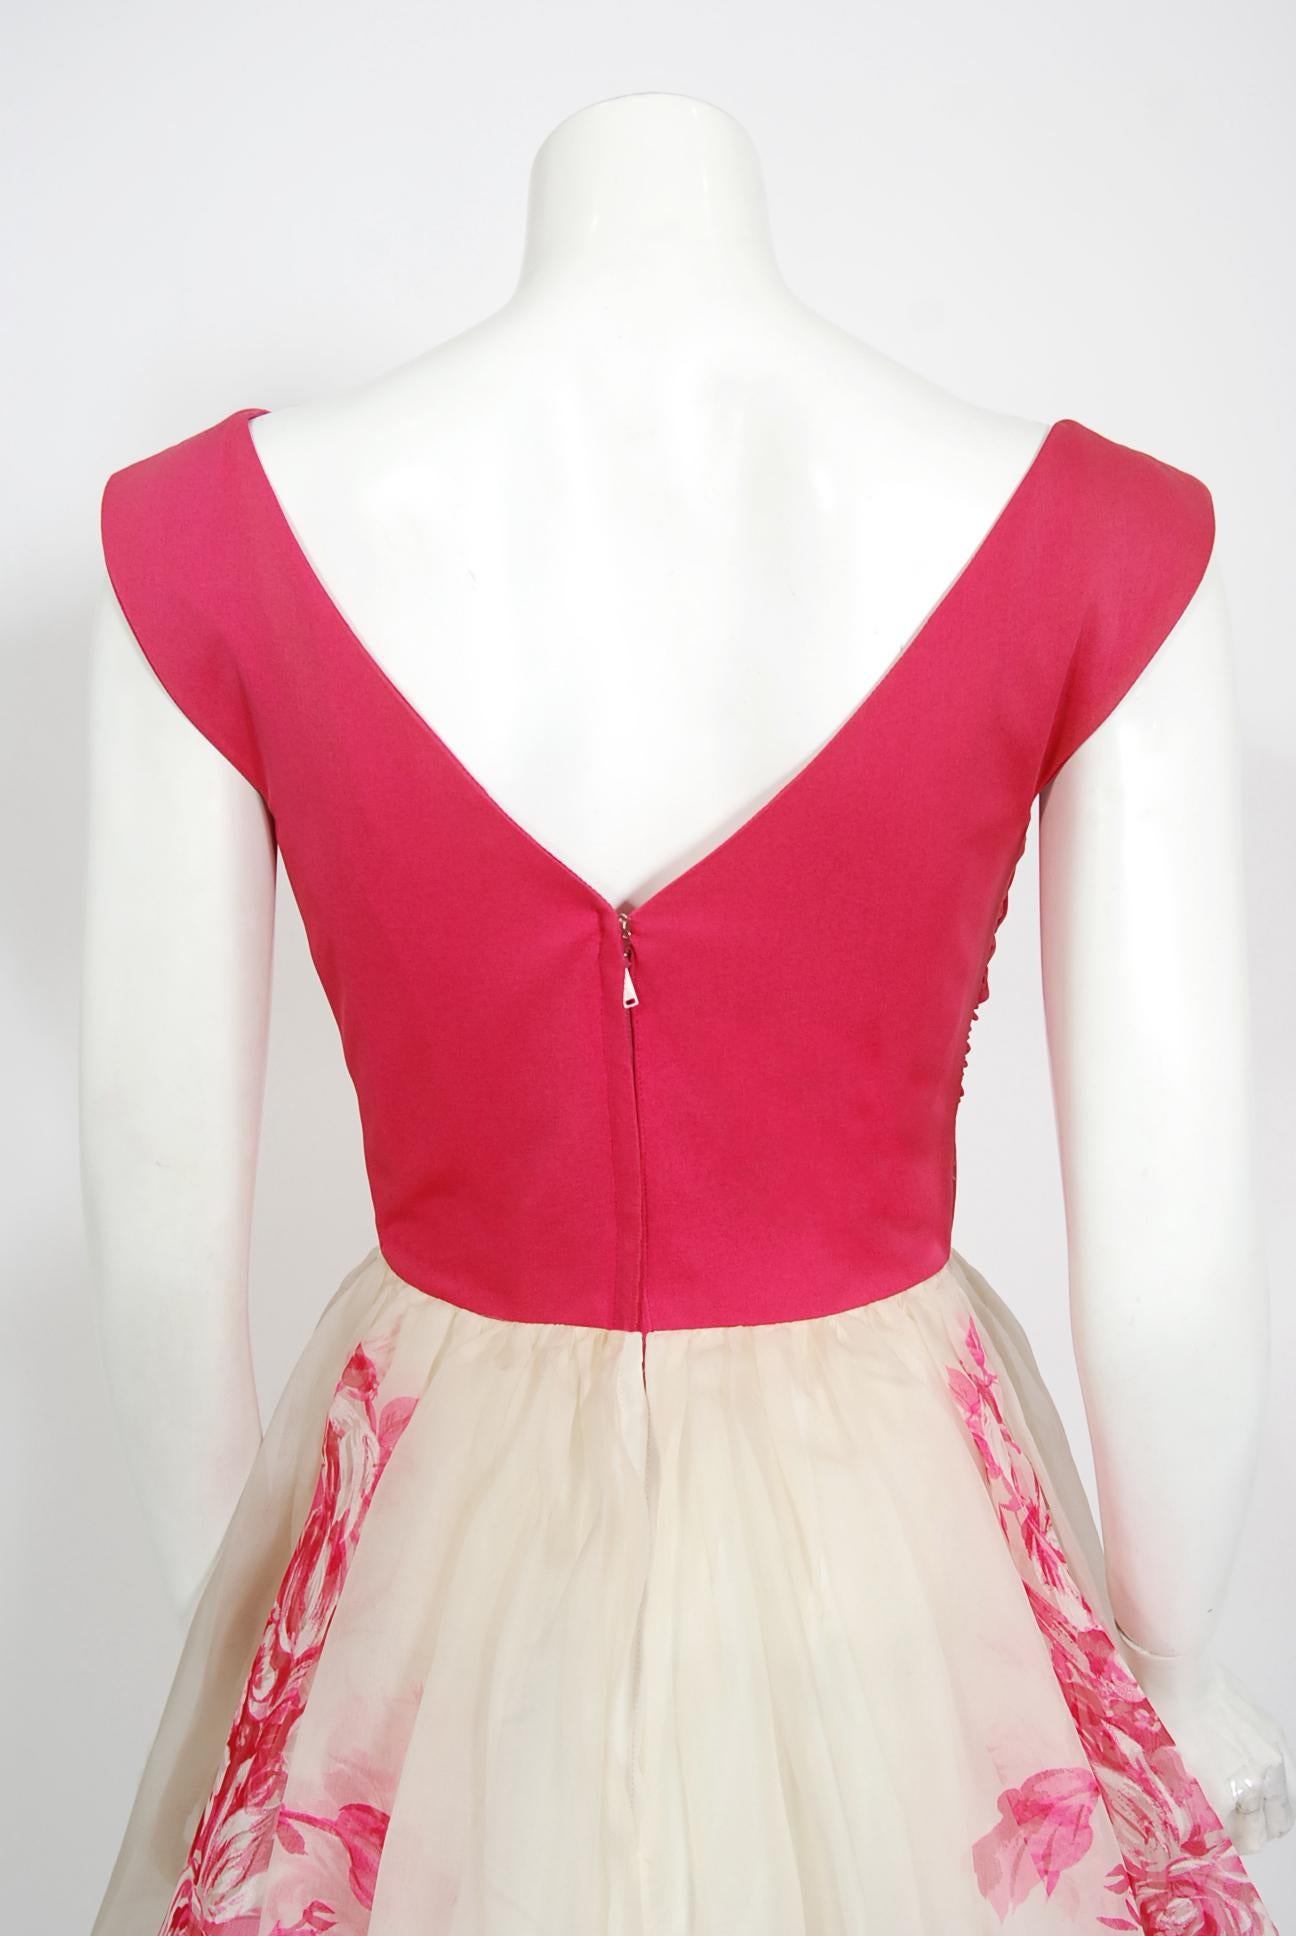 Vintage 1950's Pink Floral Bow Print Silk Ruched Jersey Dress Owned by Yma Sumac 4